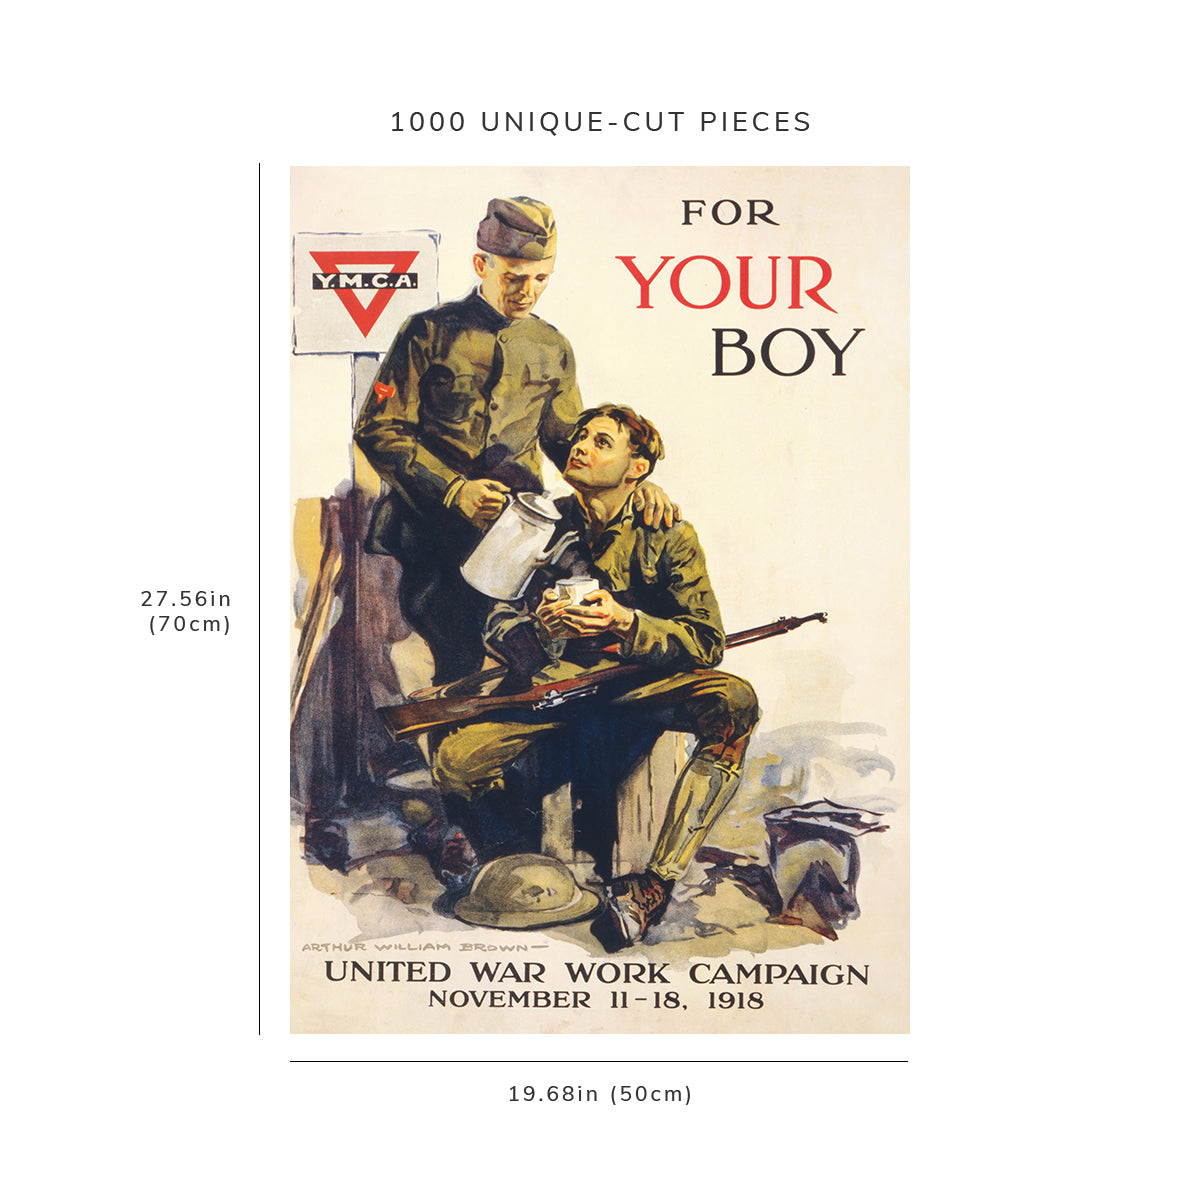 1000 piece puzzle: 1918 | For your boy United War Work Campaign | Arthur William Brown